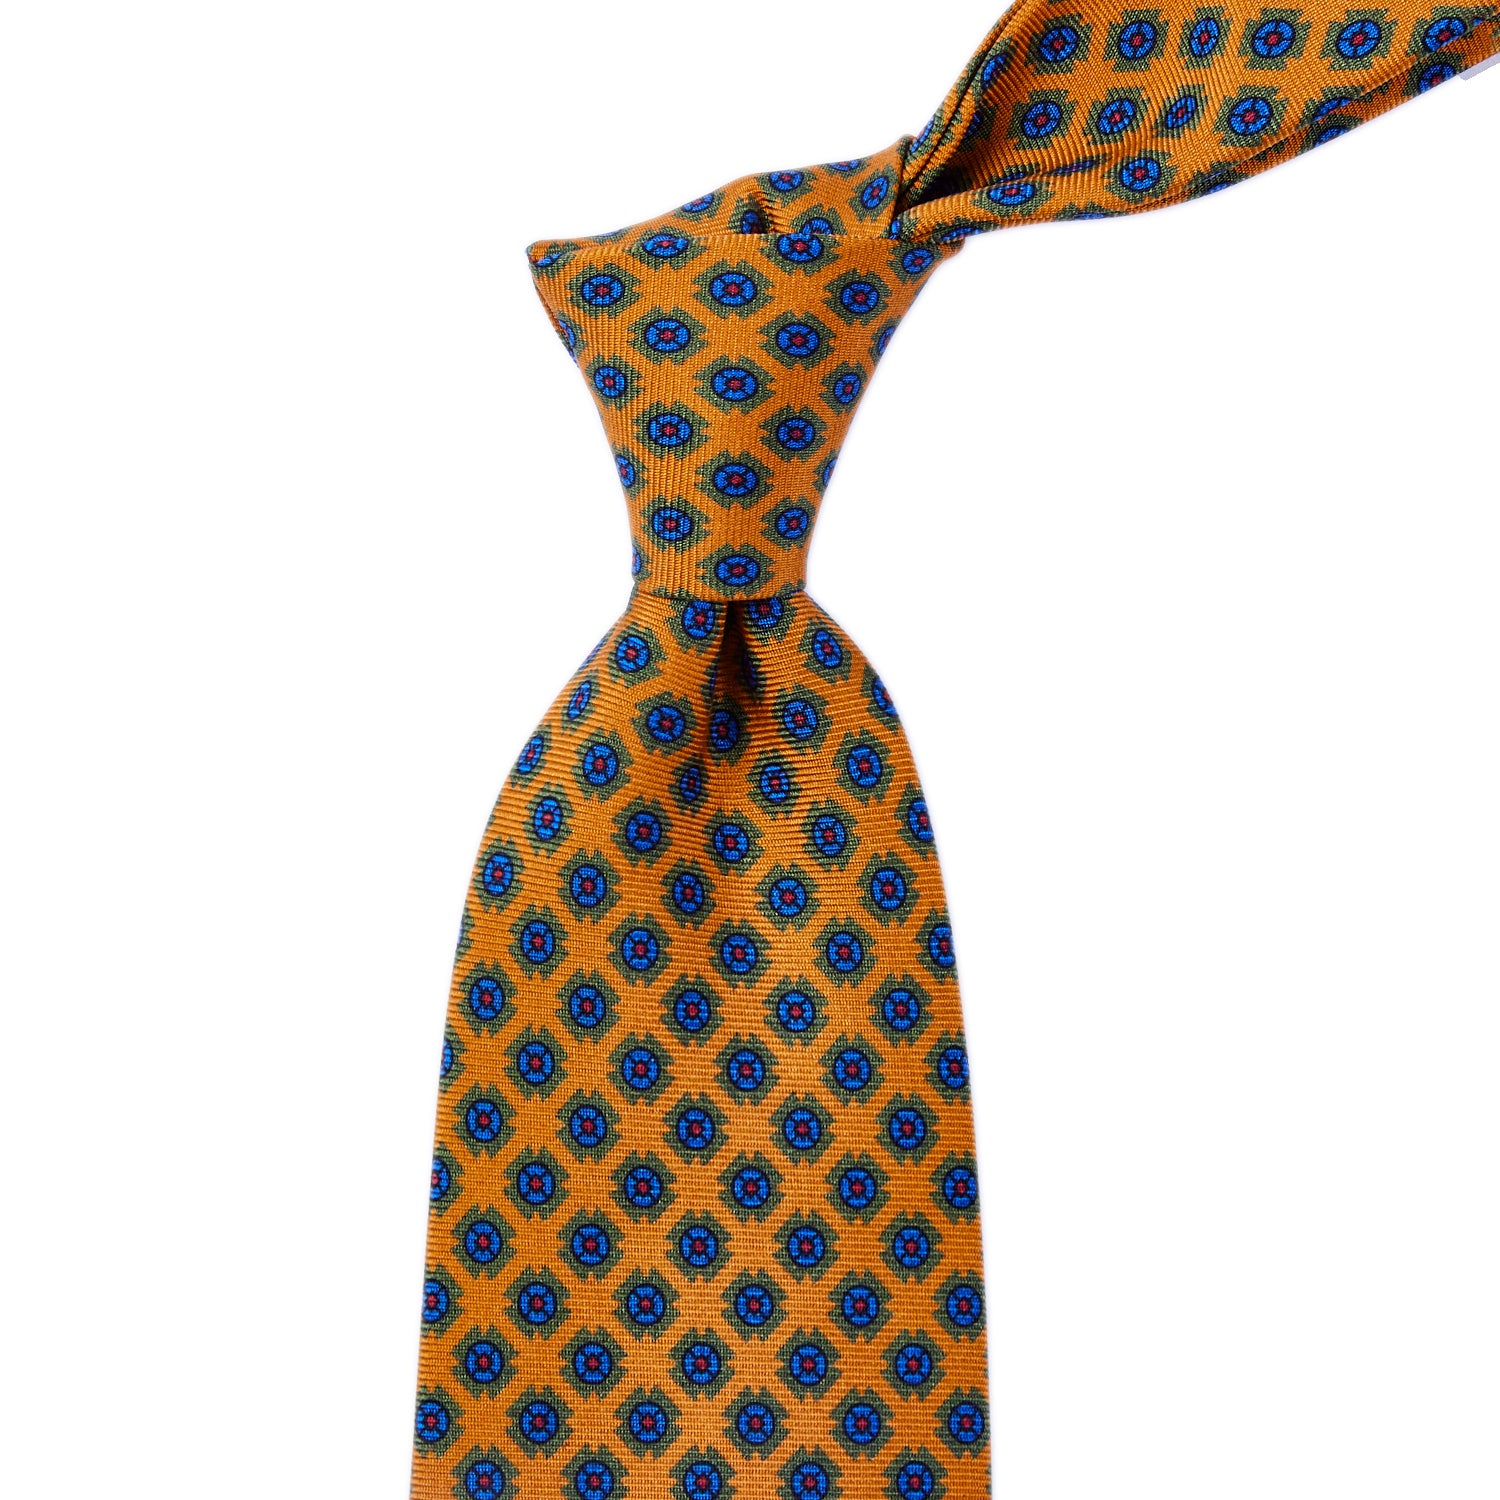 A Sovereign Grade Amber Deco Square Printed Silk Tie in blue and orange color by KirbyAllison.com.